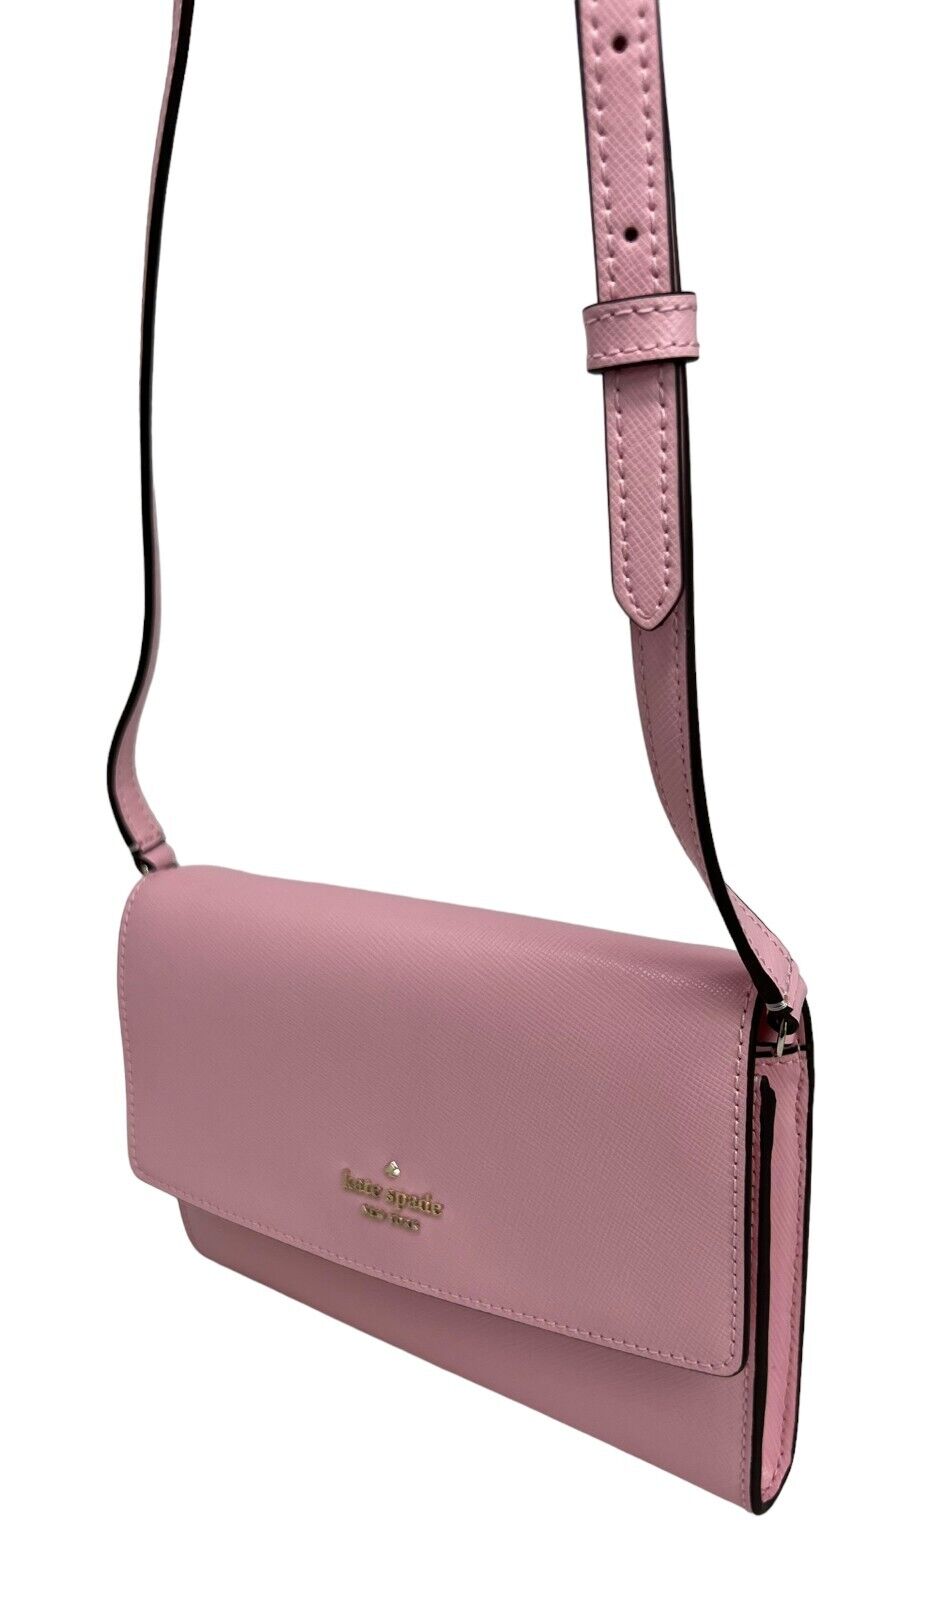 Kate Spade Perry Saffiano Leather Mitten Pink Crossbody Bag K8709